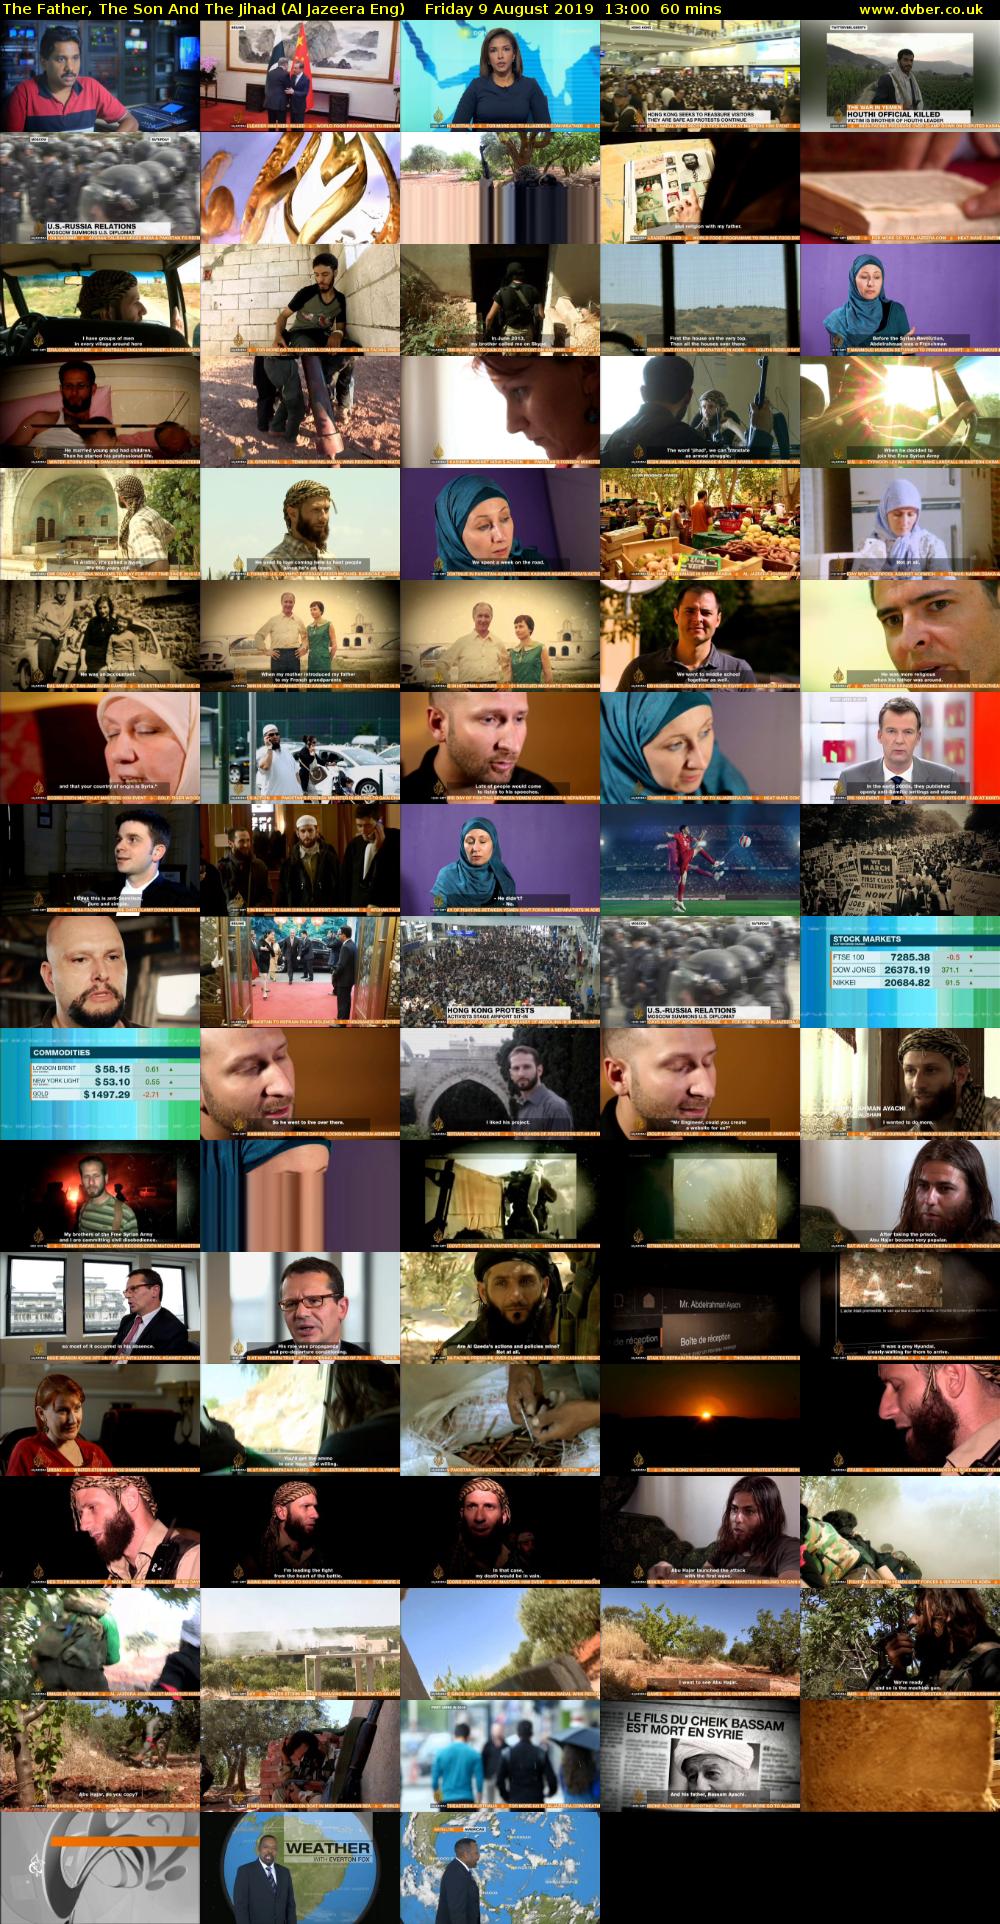 The Father, The Son And The Jihad (Al Jazeera Eng) Friday 9 August 2019 13:00 - 14:00